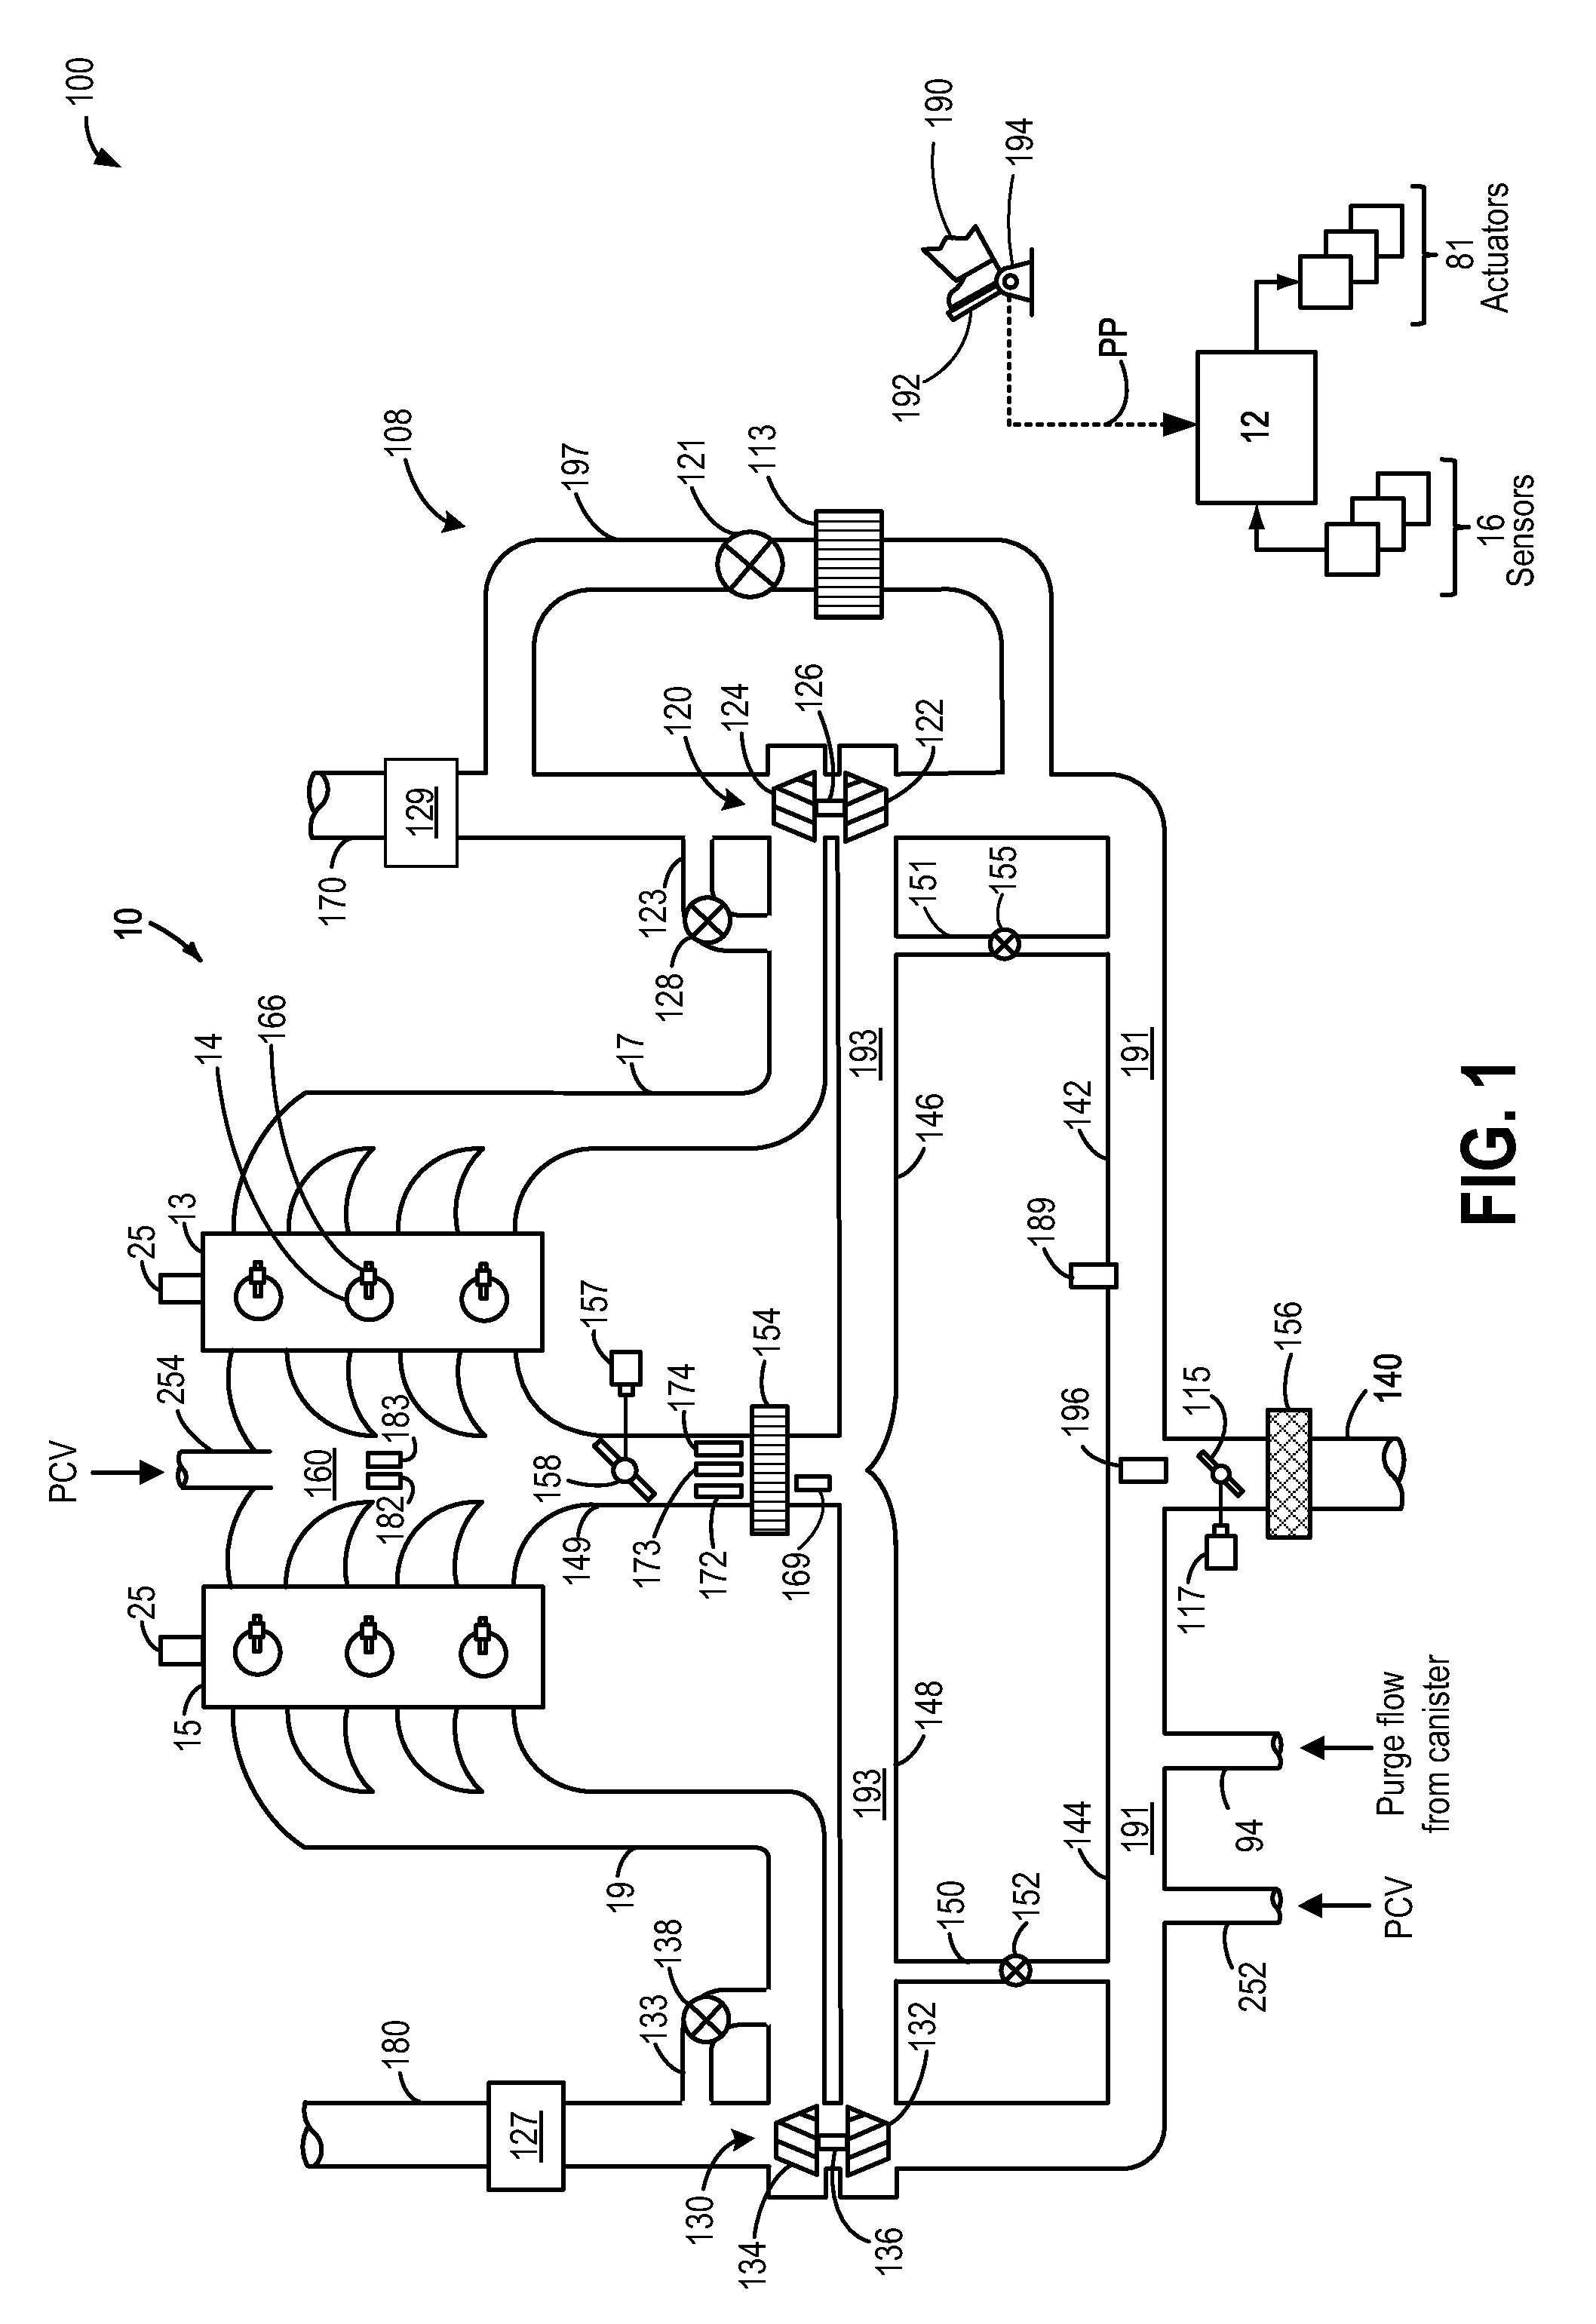 Method for reducing engine oil dilution